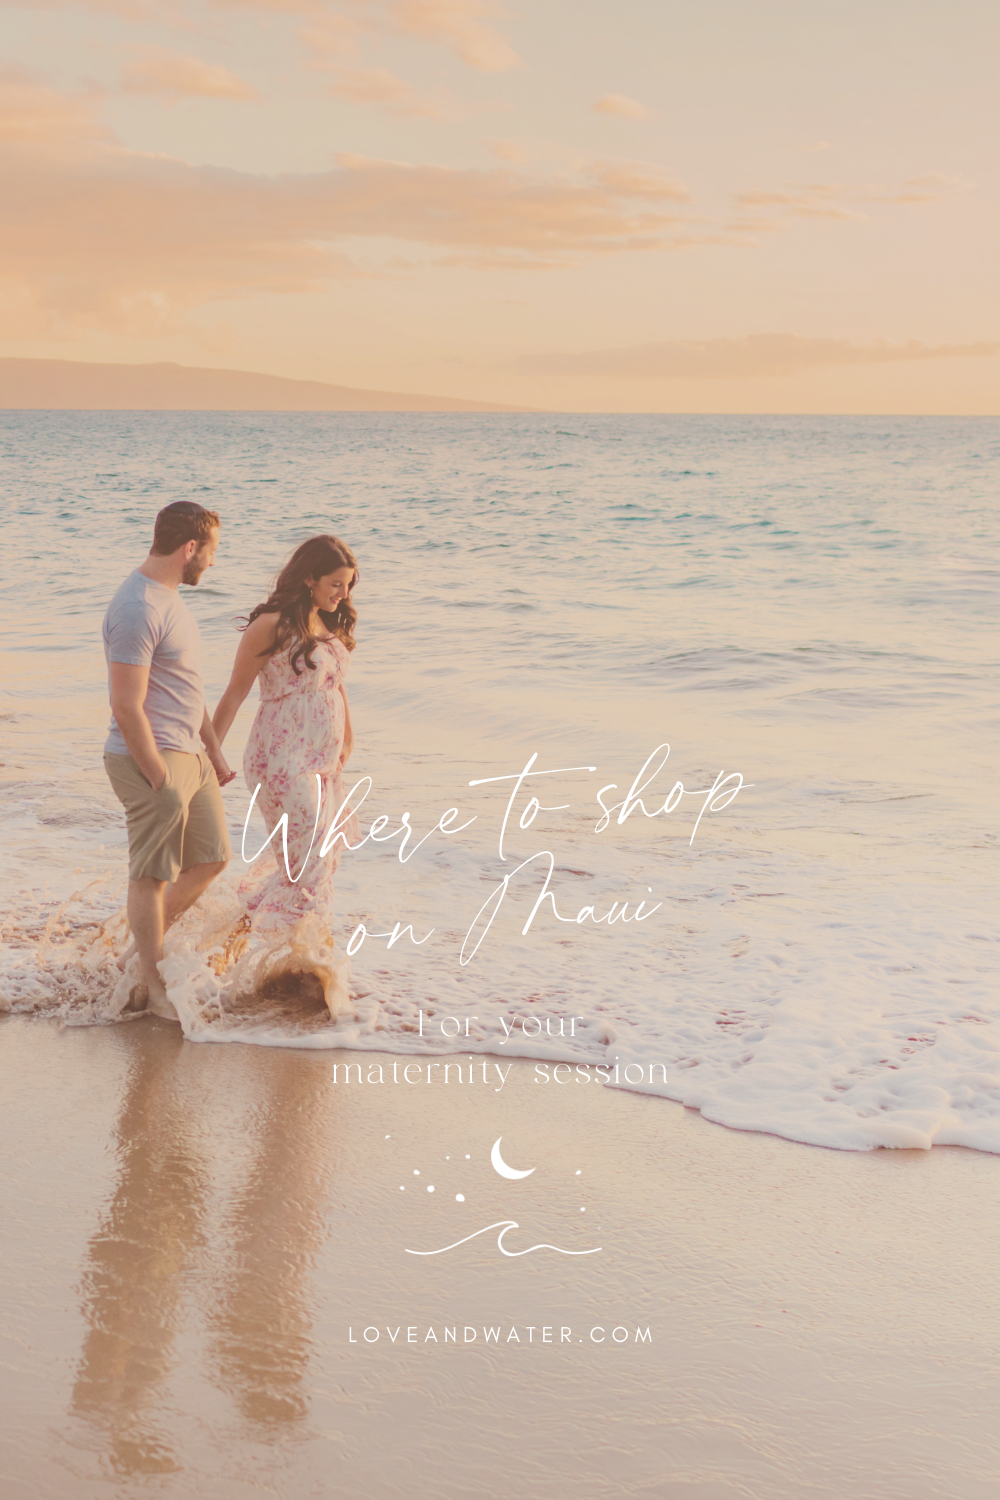 Where to shop on Maui for your maternity session with Love + Water